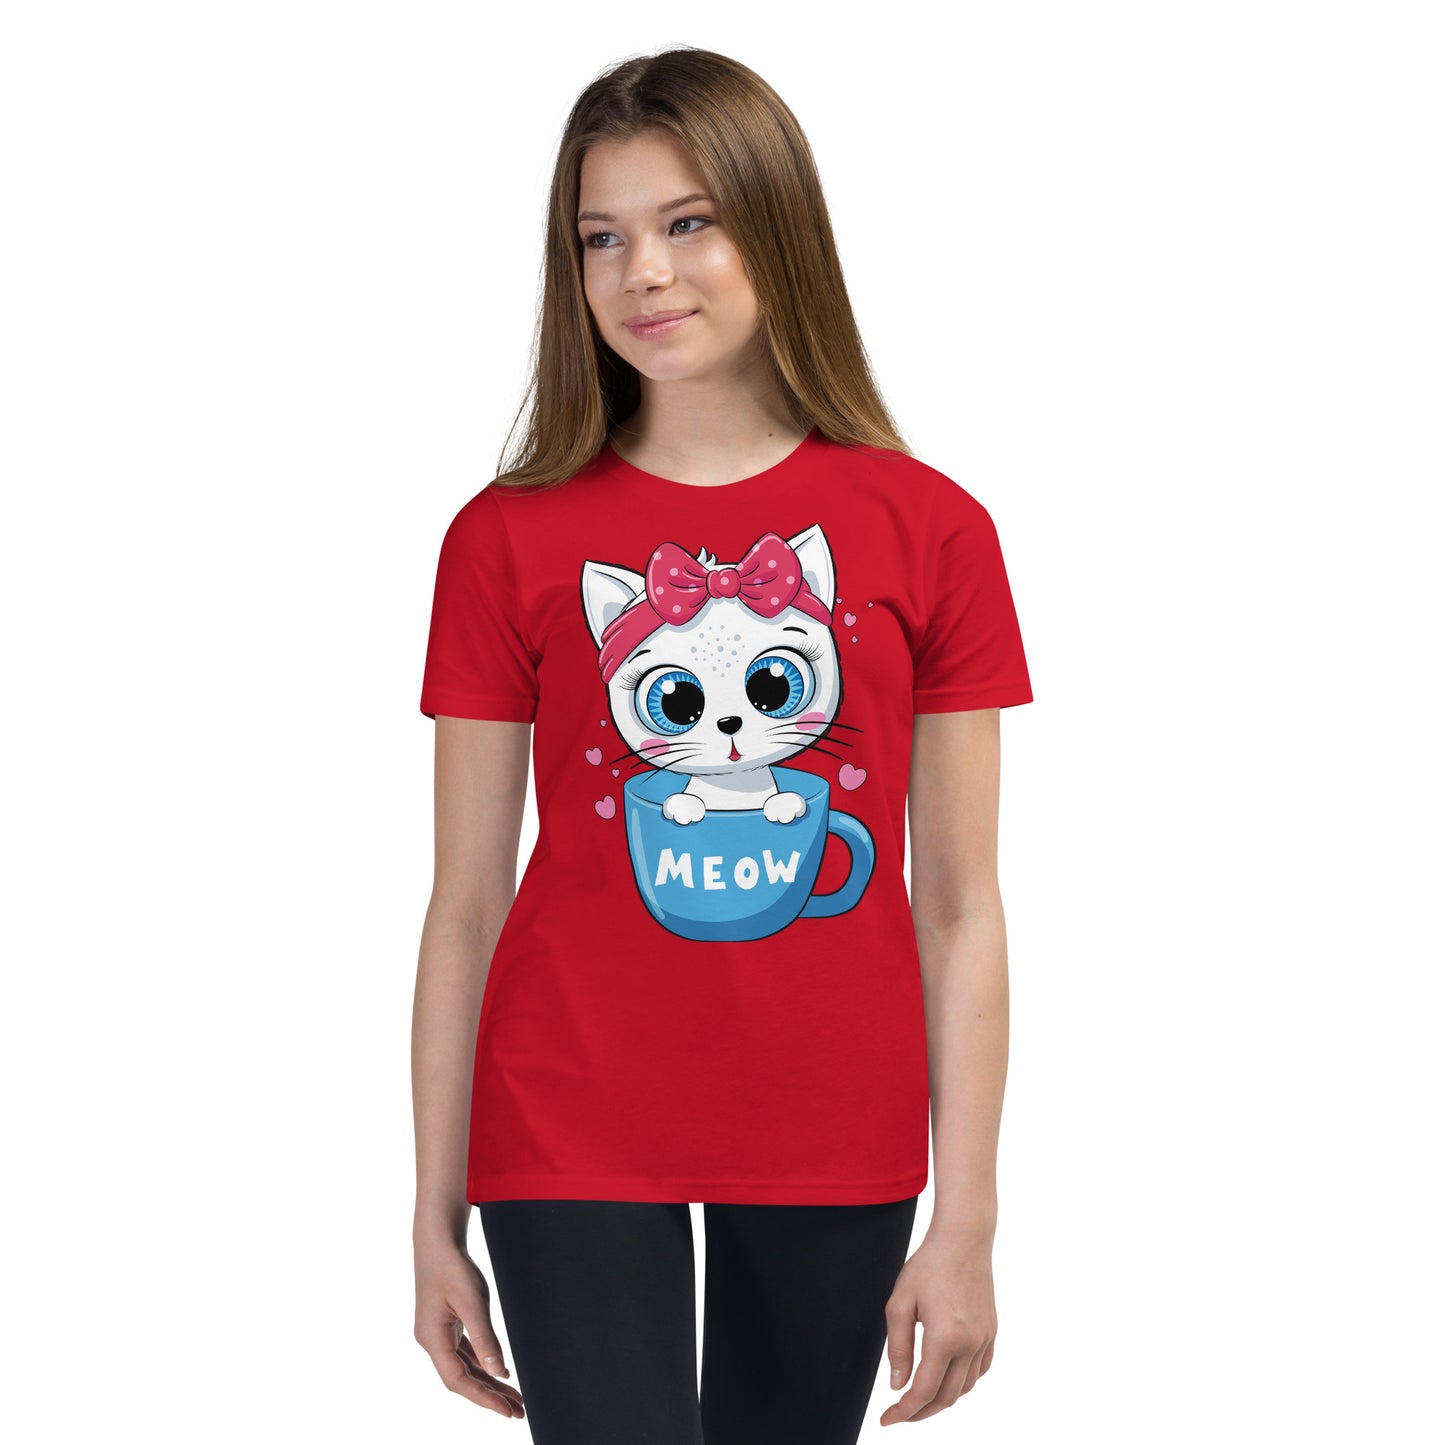 Cute Baby Cat Sitting in Cup T-shirt, No. 0269